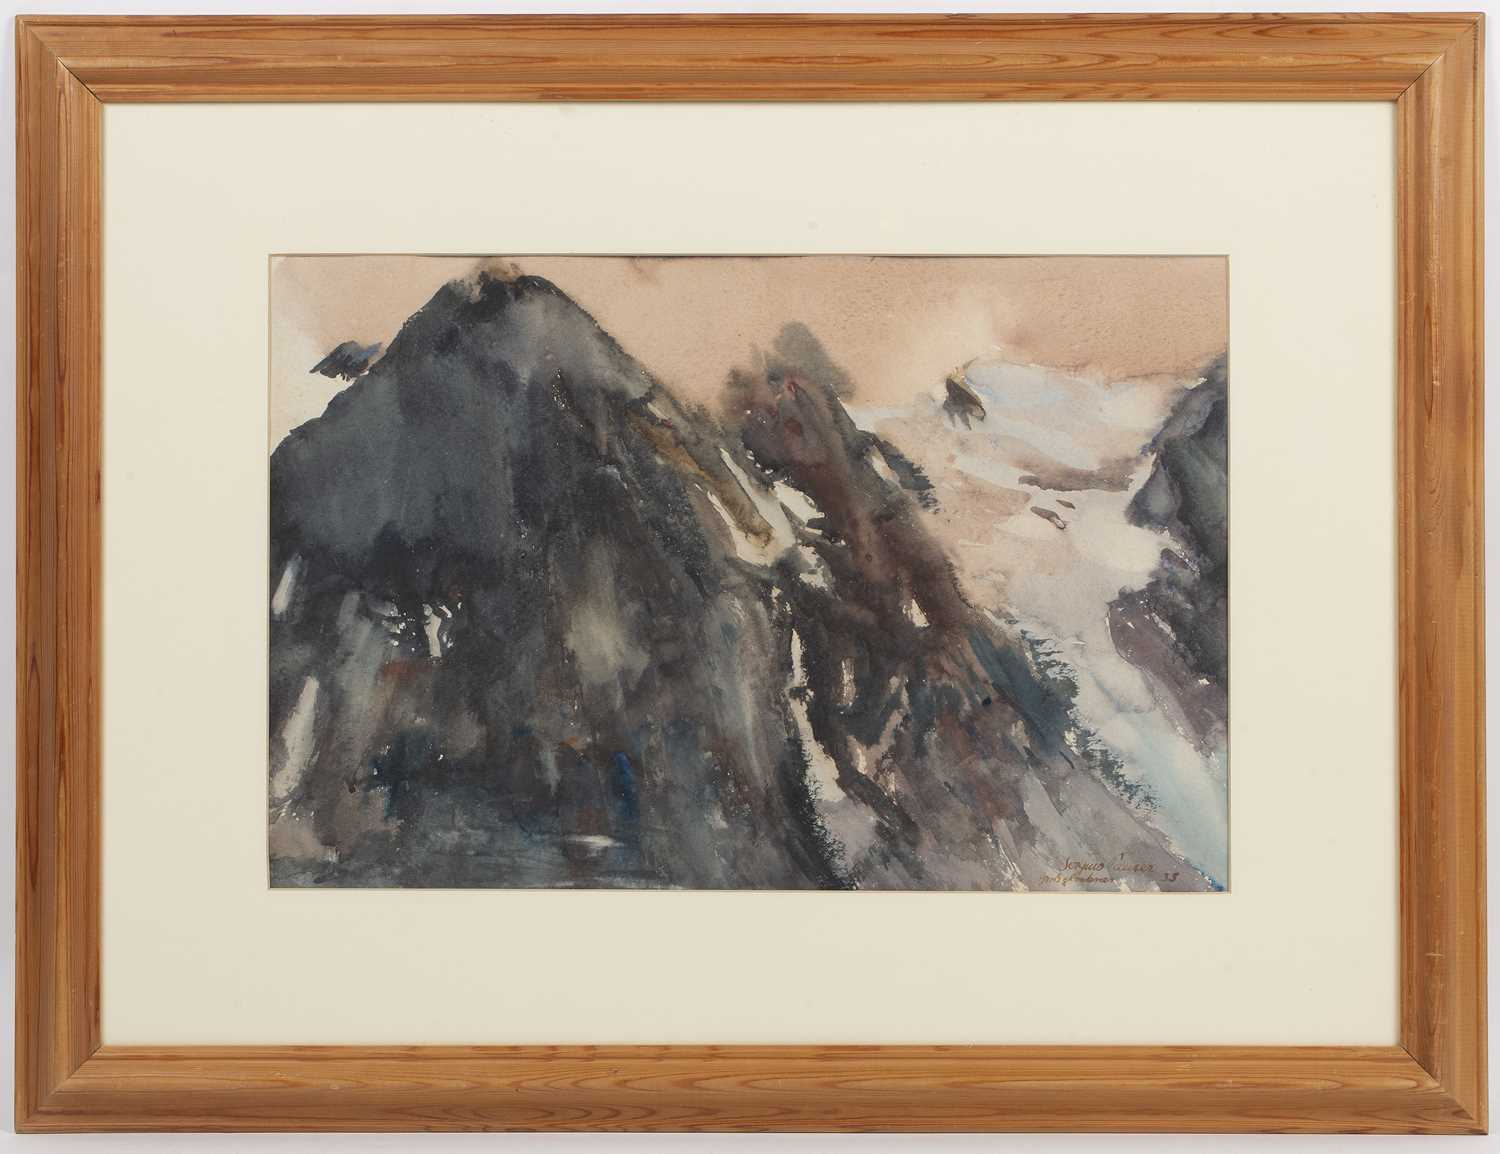 Sergius Pauser (1896-1970) Grossglockner, 1935 signed, inscribed, and dated (lower right) - Image 3 of 3